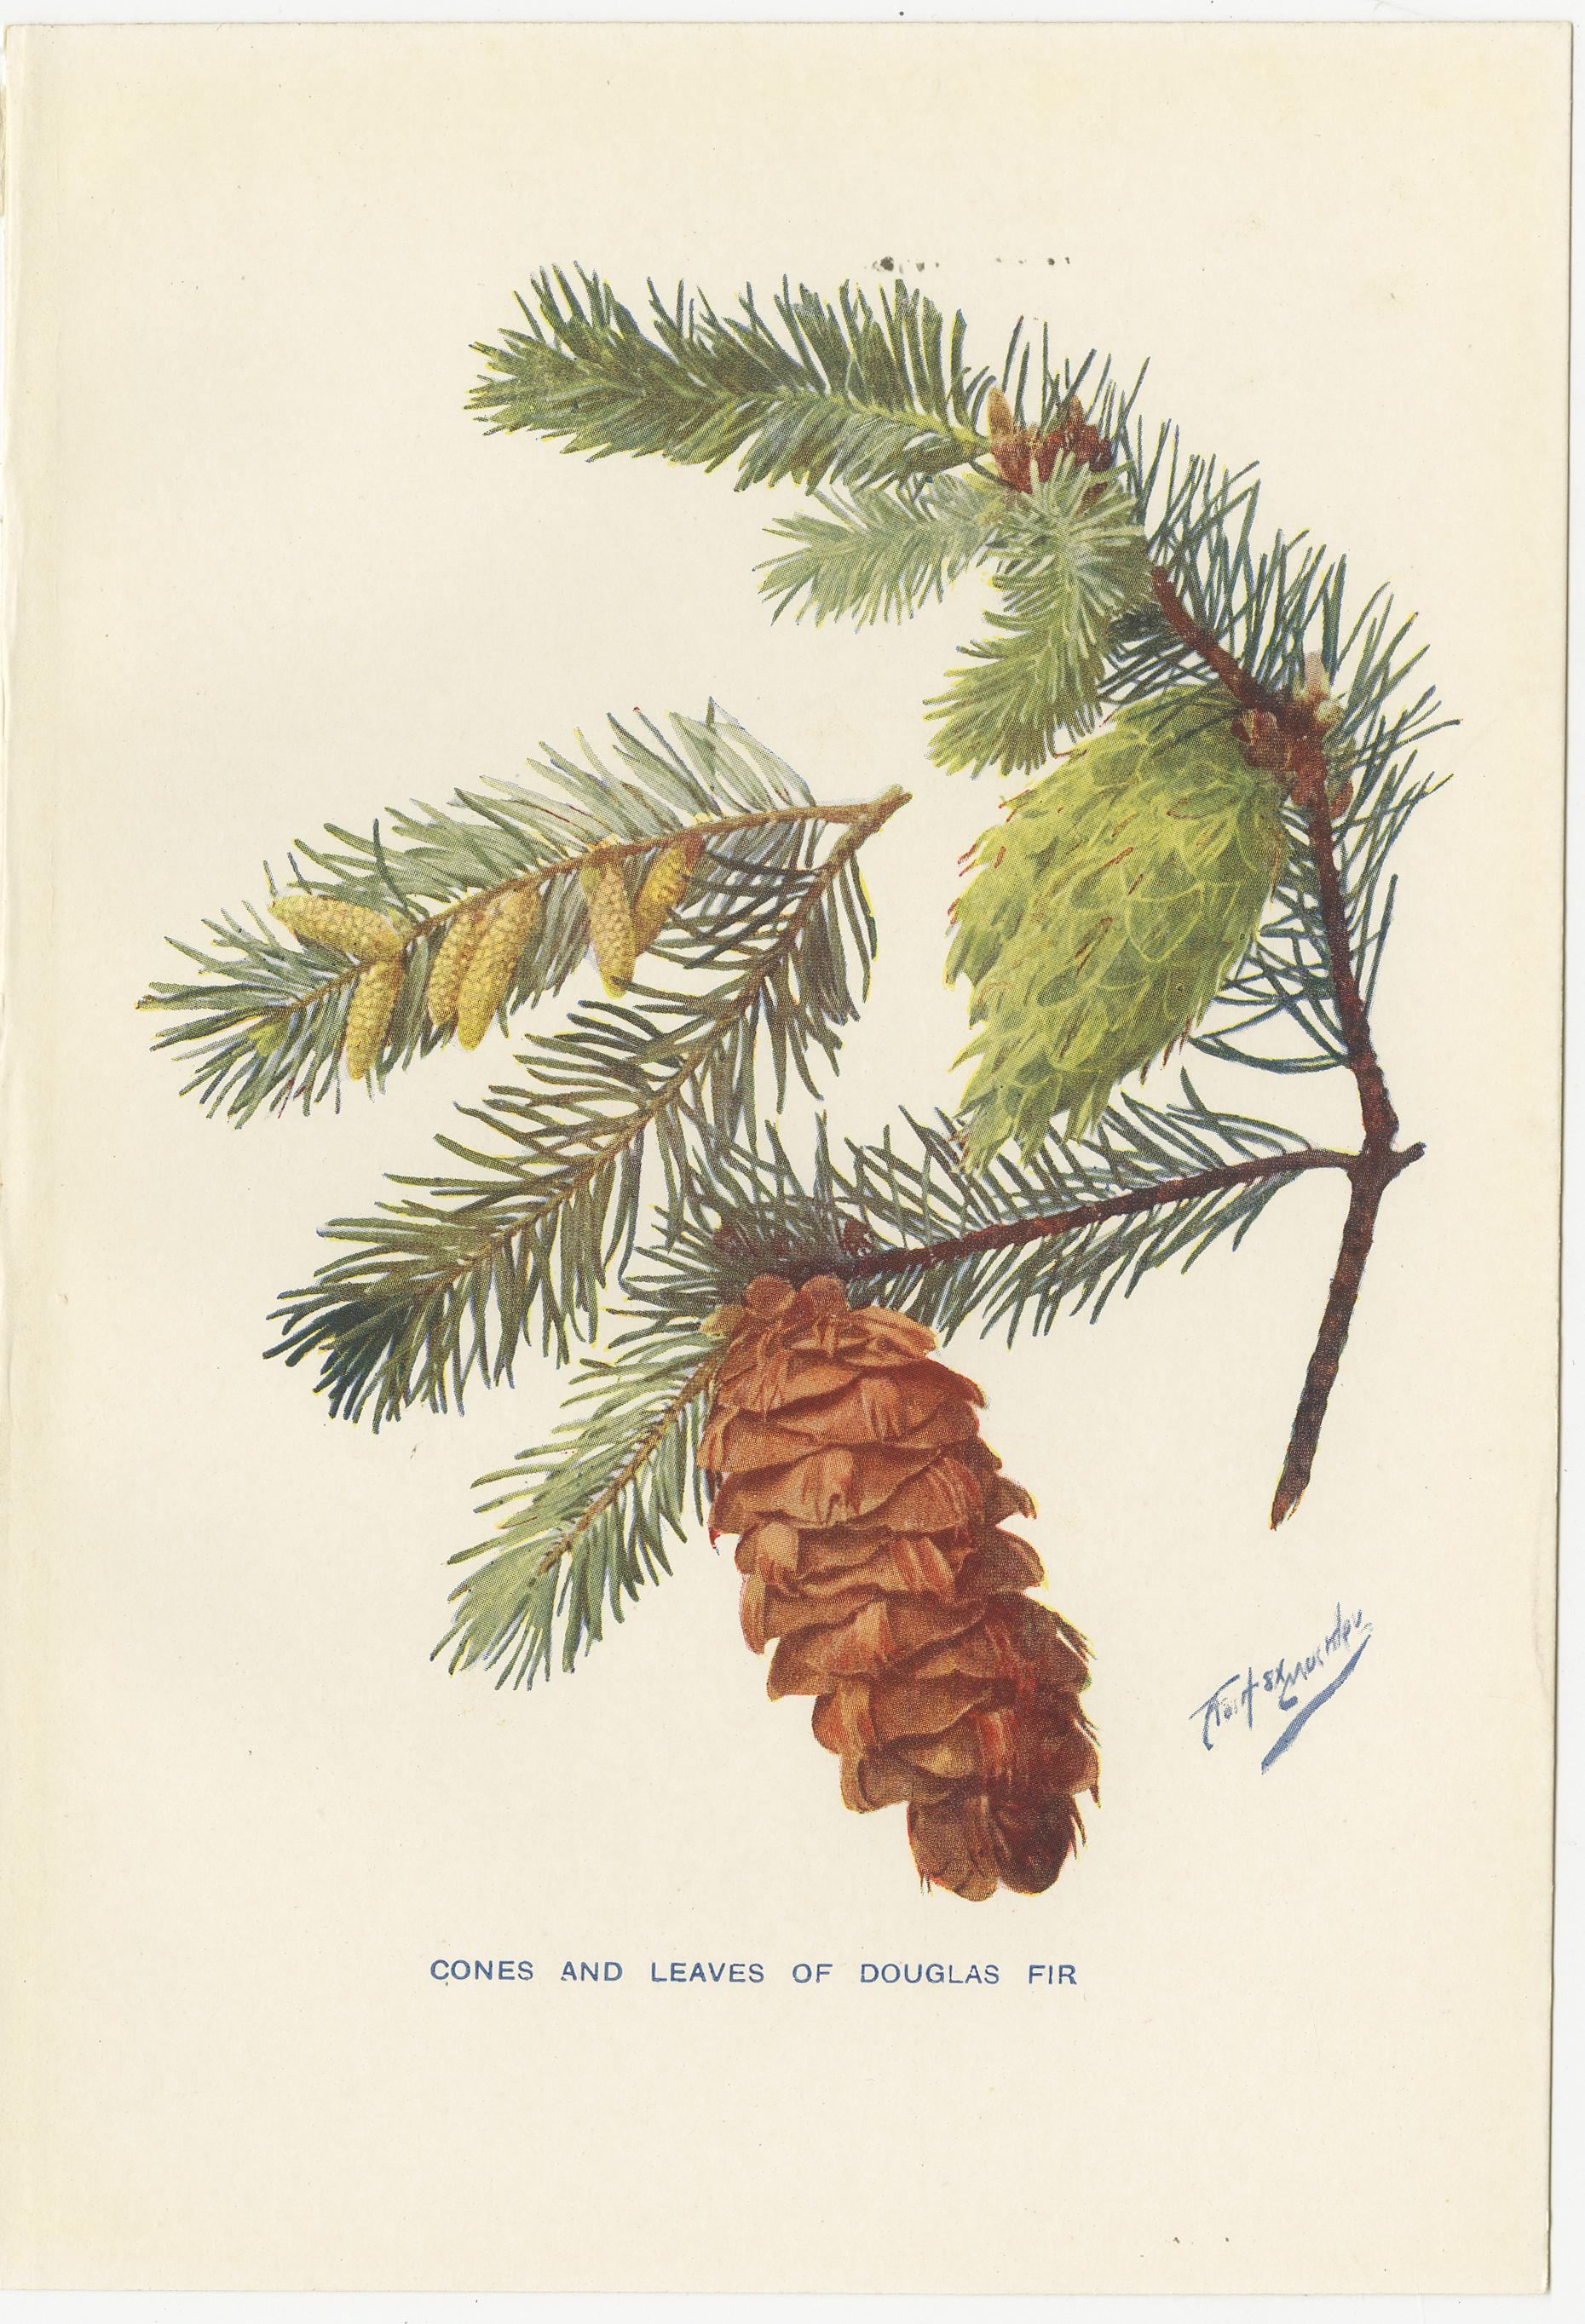 Antique print of various pine trees and pine cones titled 'Cones and Leaves of Douglas Fir - Cones and Leaves of Scots Fir - Male Flowers, Cones, and Leaves of Larch'. Source unknown, to be determined. Published circa 1930.